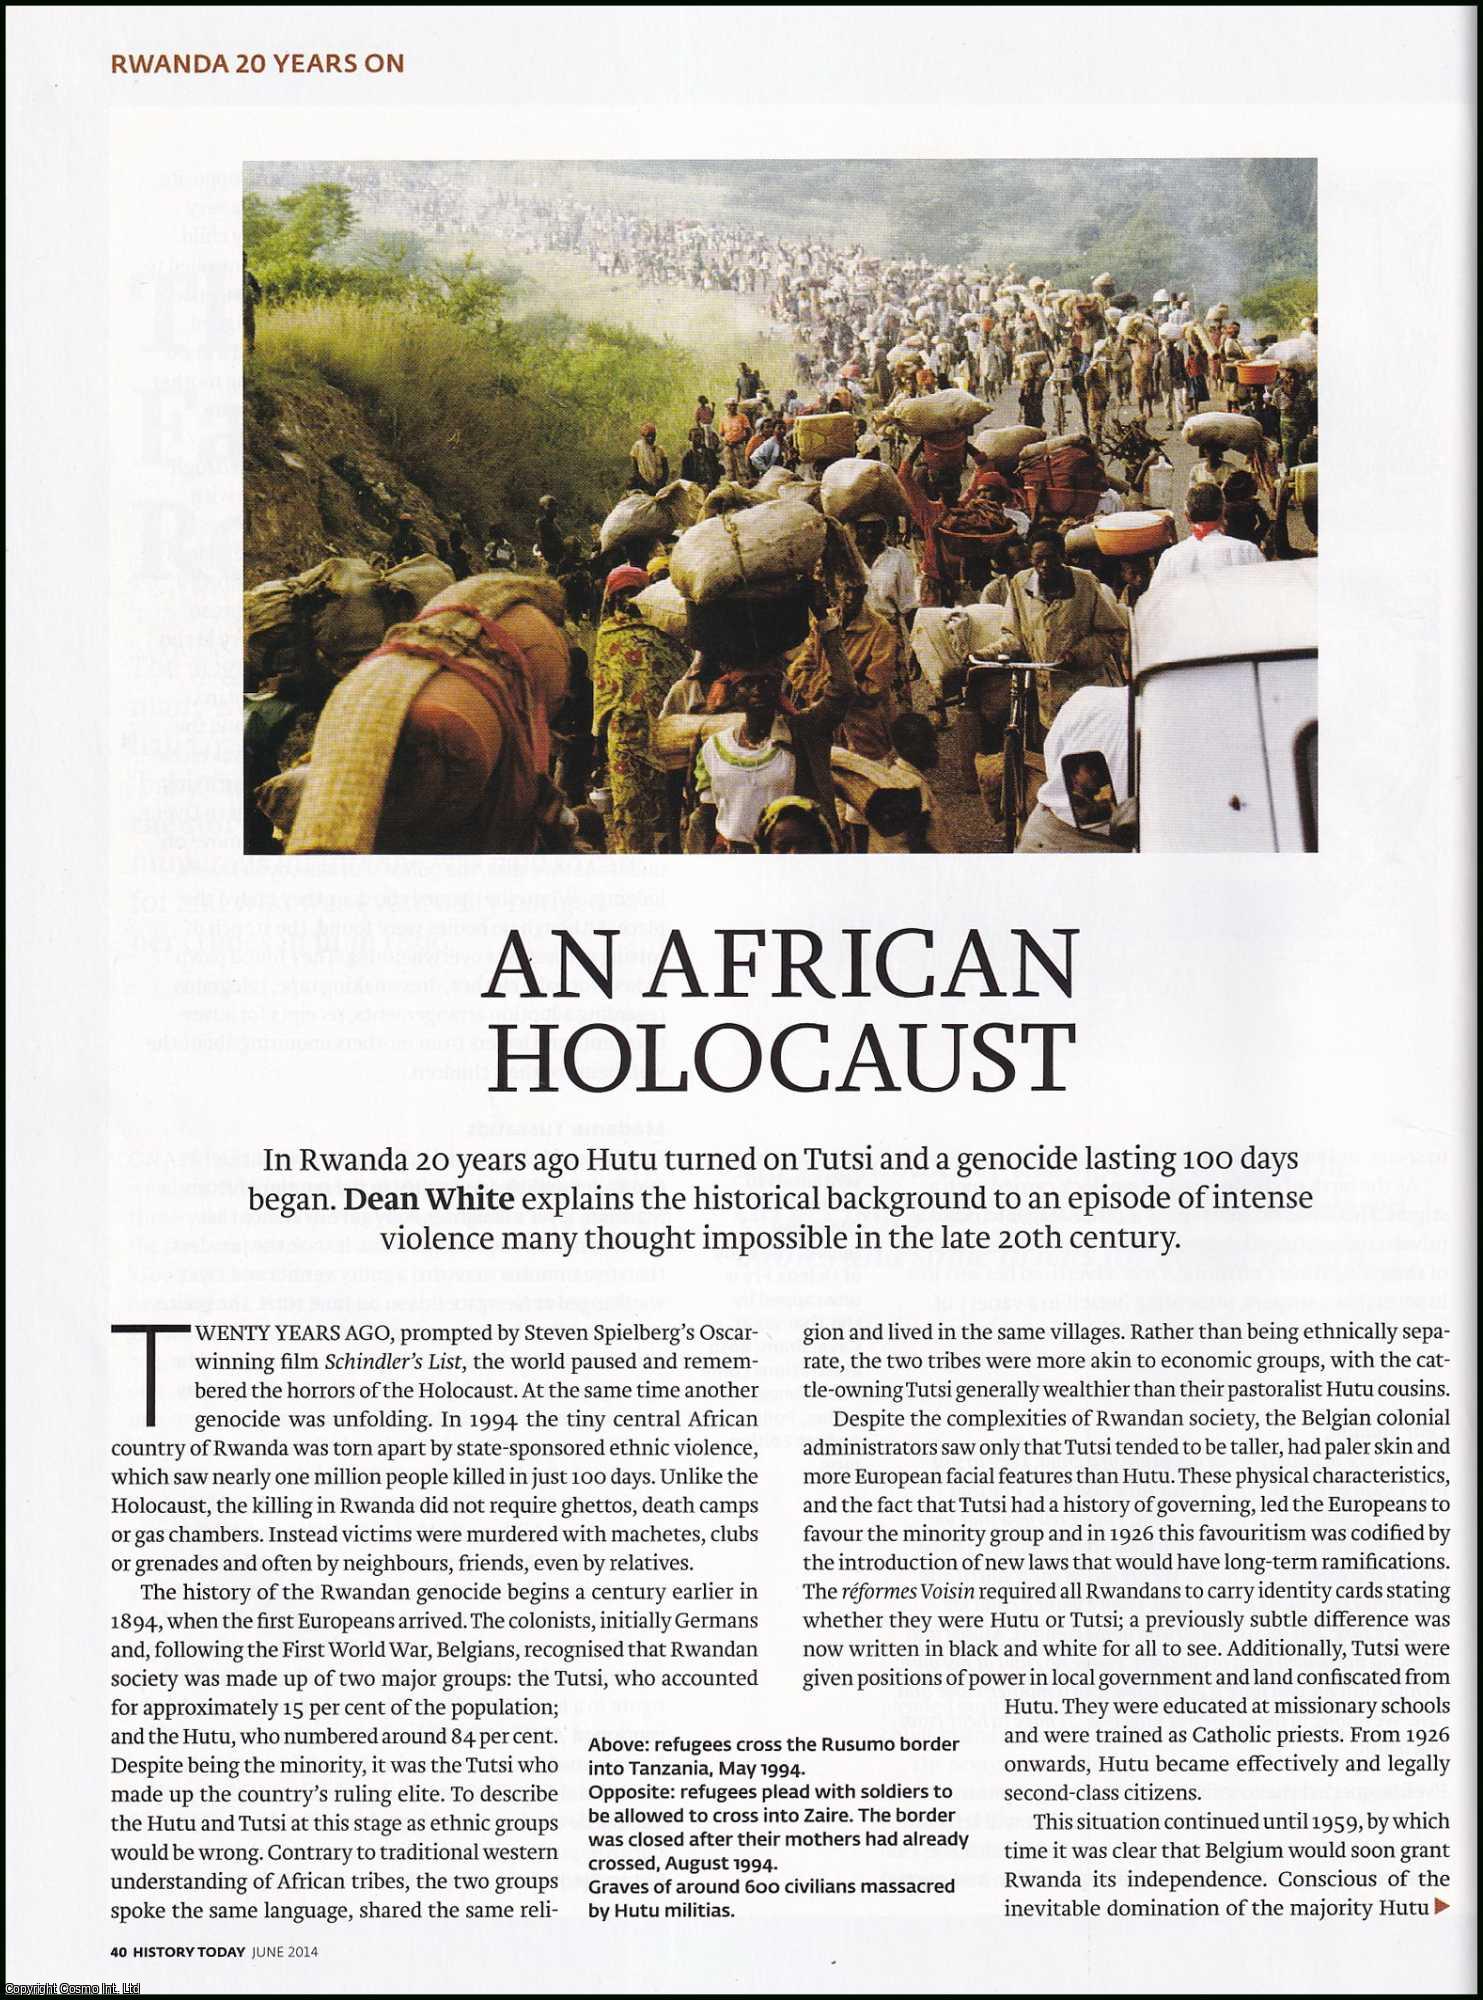 Dean White - An African Holocaust: Rwanda 20 Years On. An original article from History Today magazine, 2014.